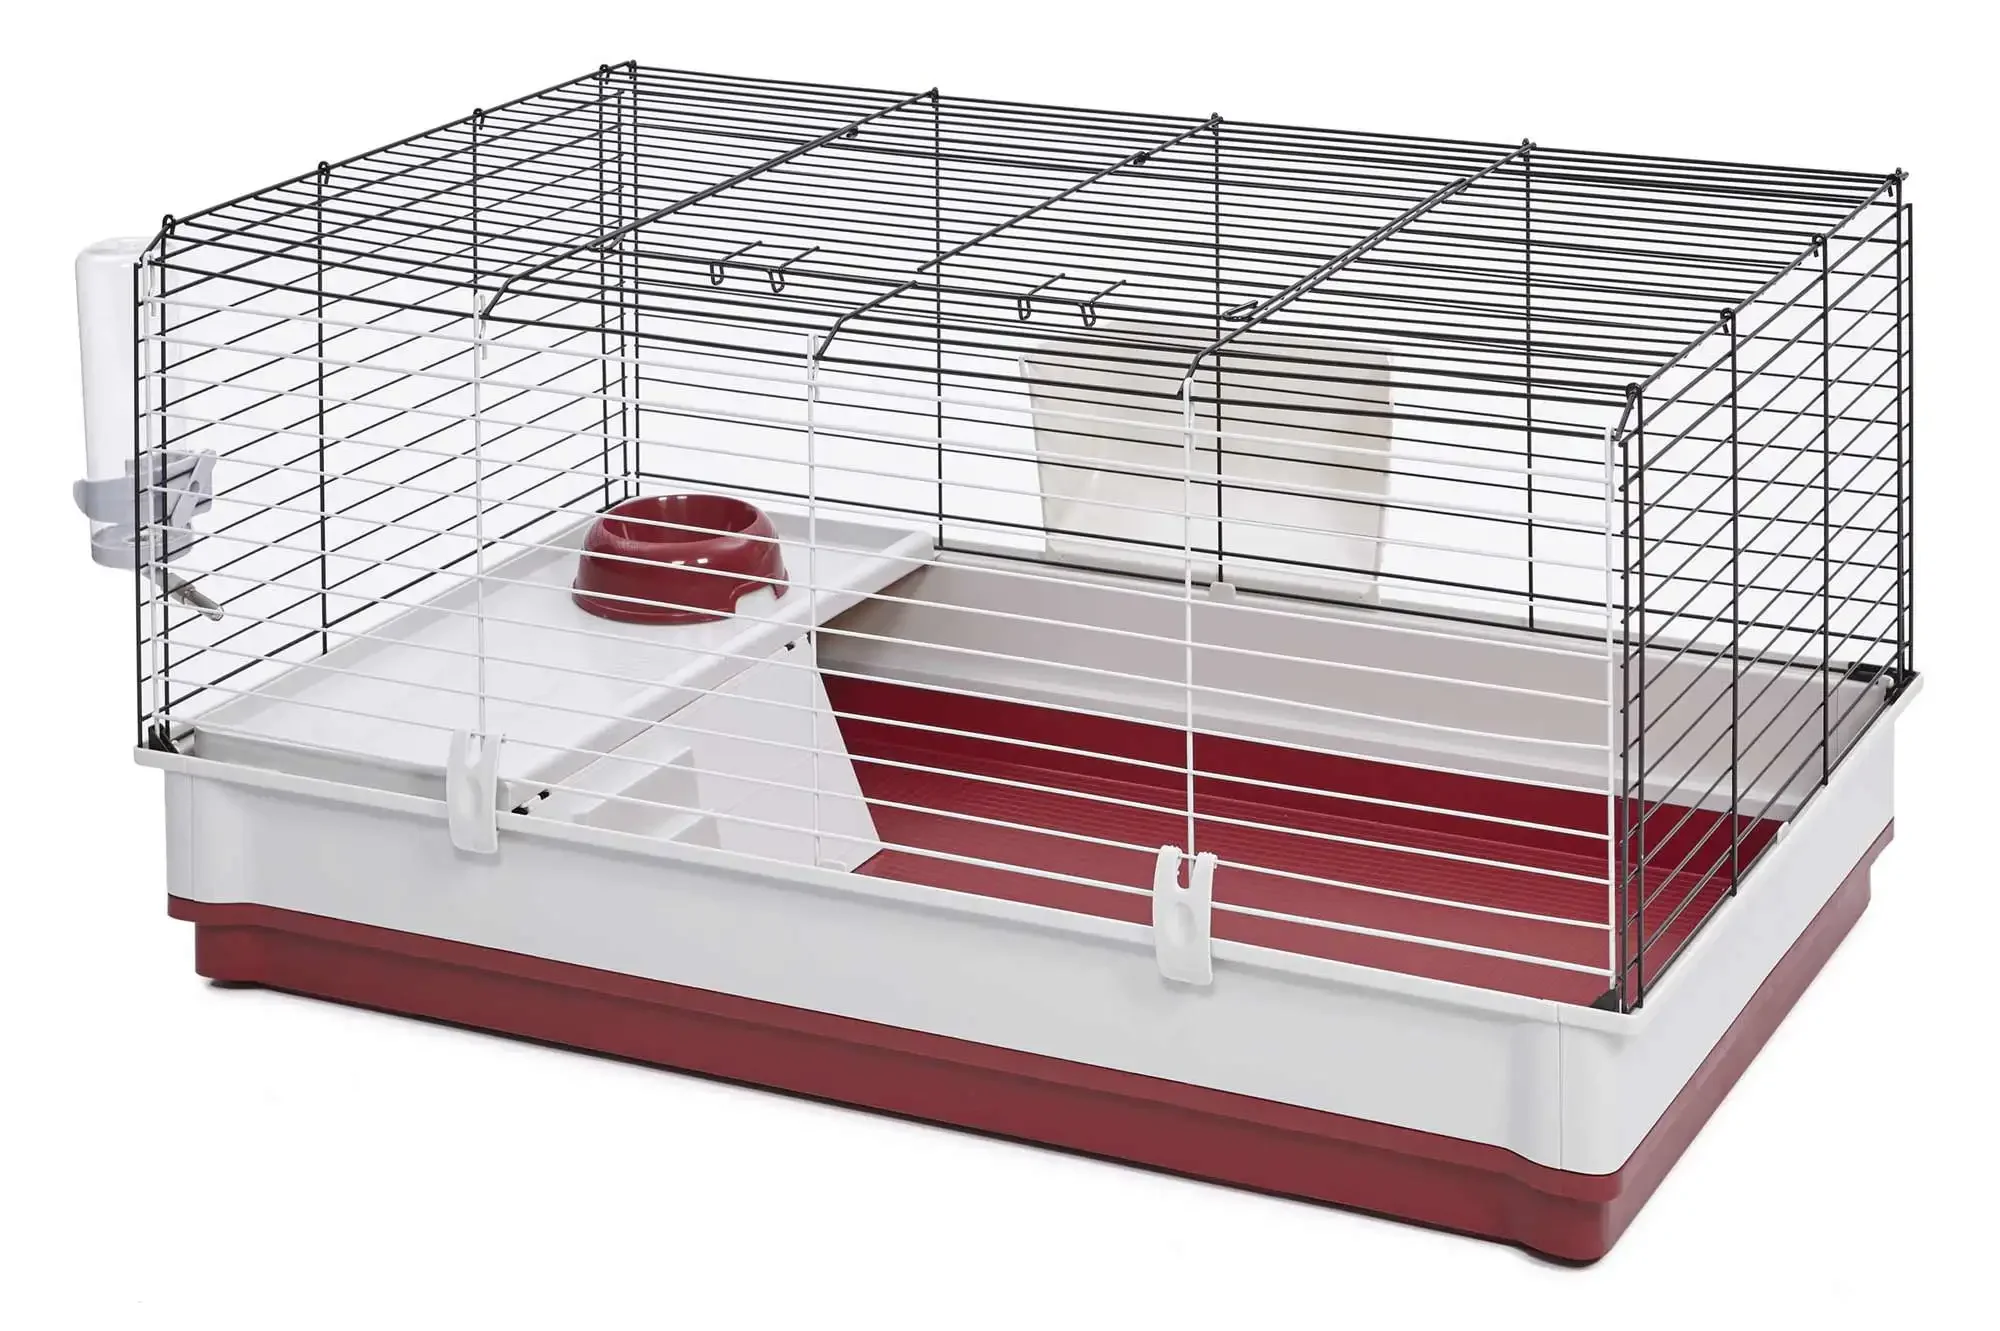 

MidWest Homes for Pets 158 Wabbitat Deluxe Rabbit Home, Rabbit Cage, 39.5 L x 23.75 W x 19.75 H Inch, Maroon/White